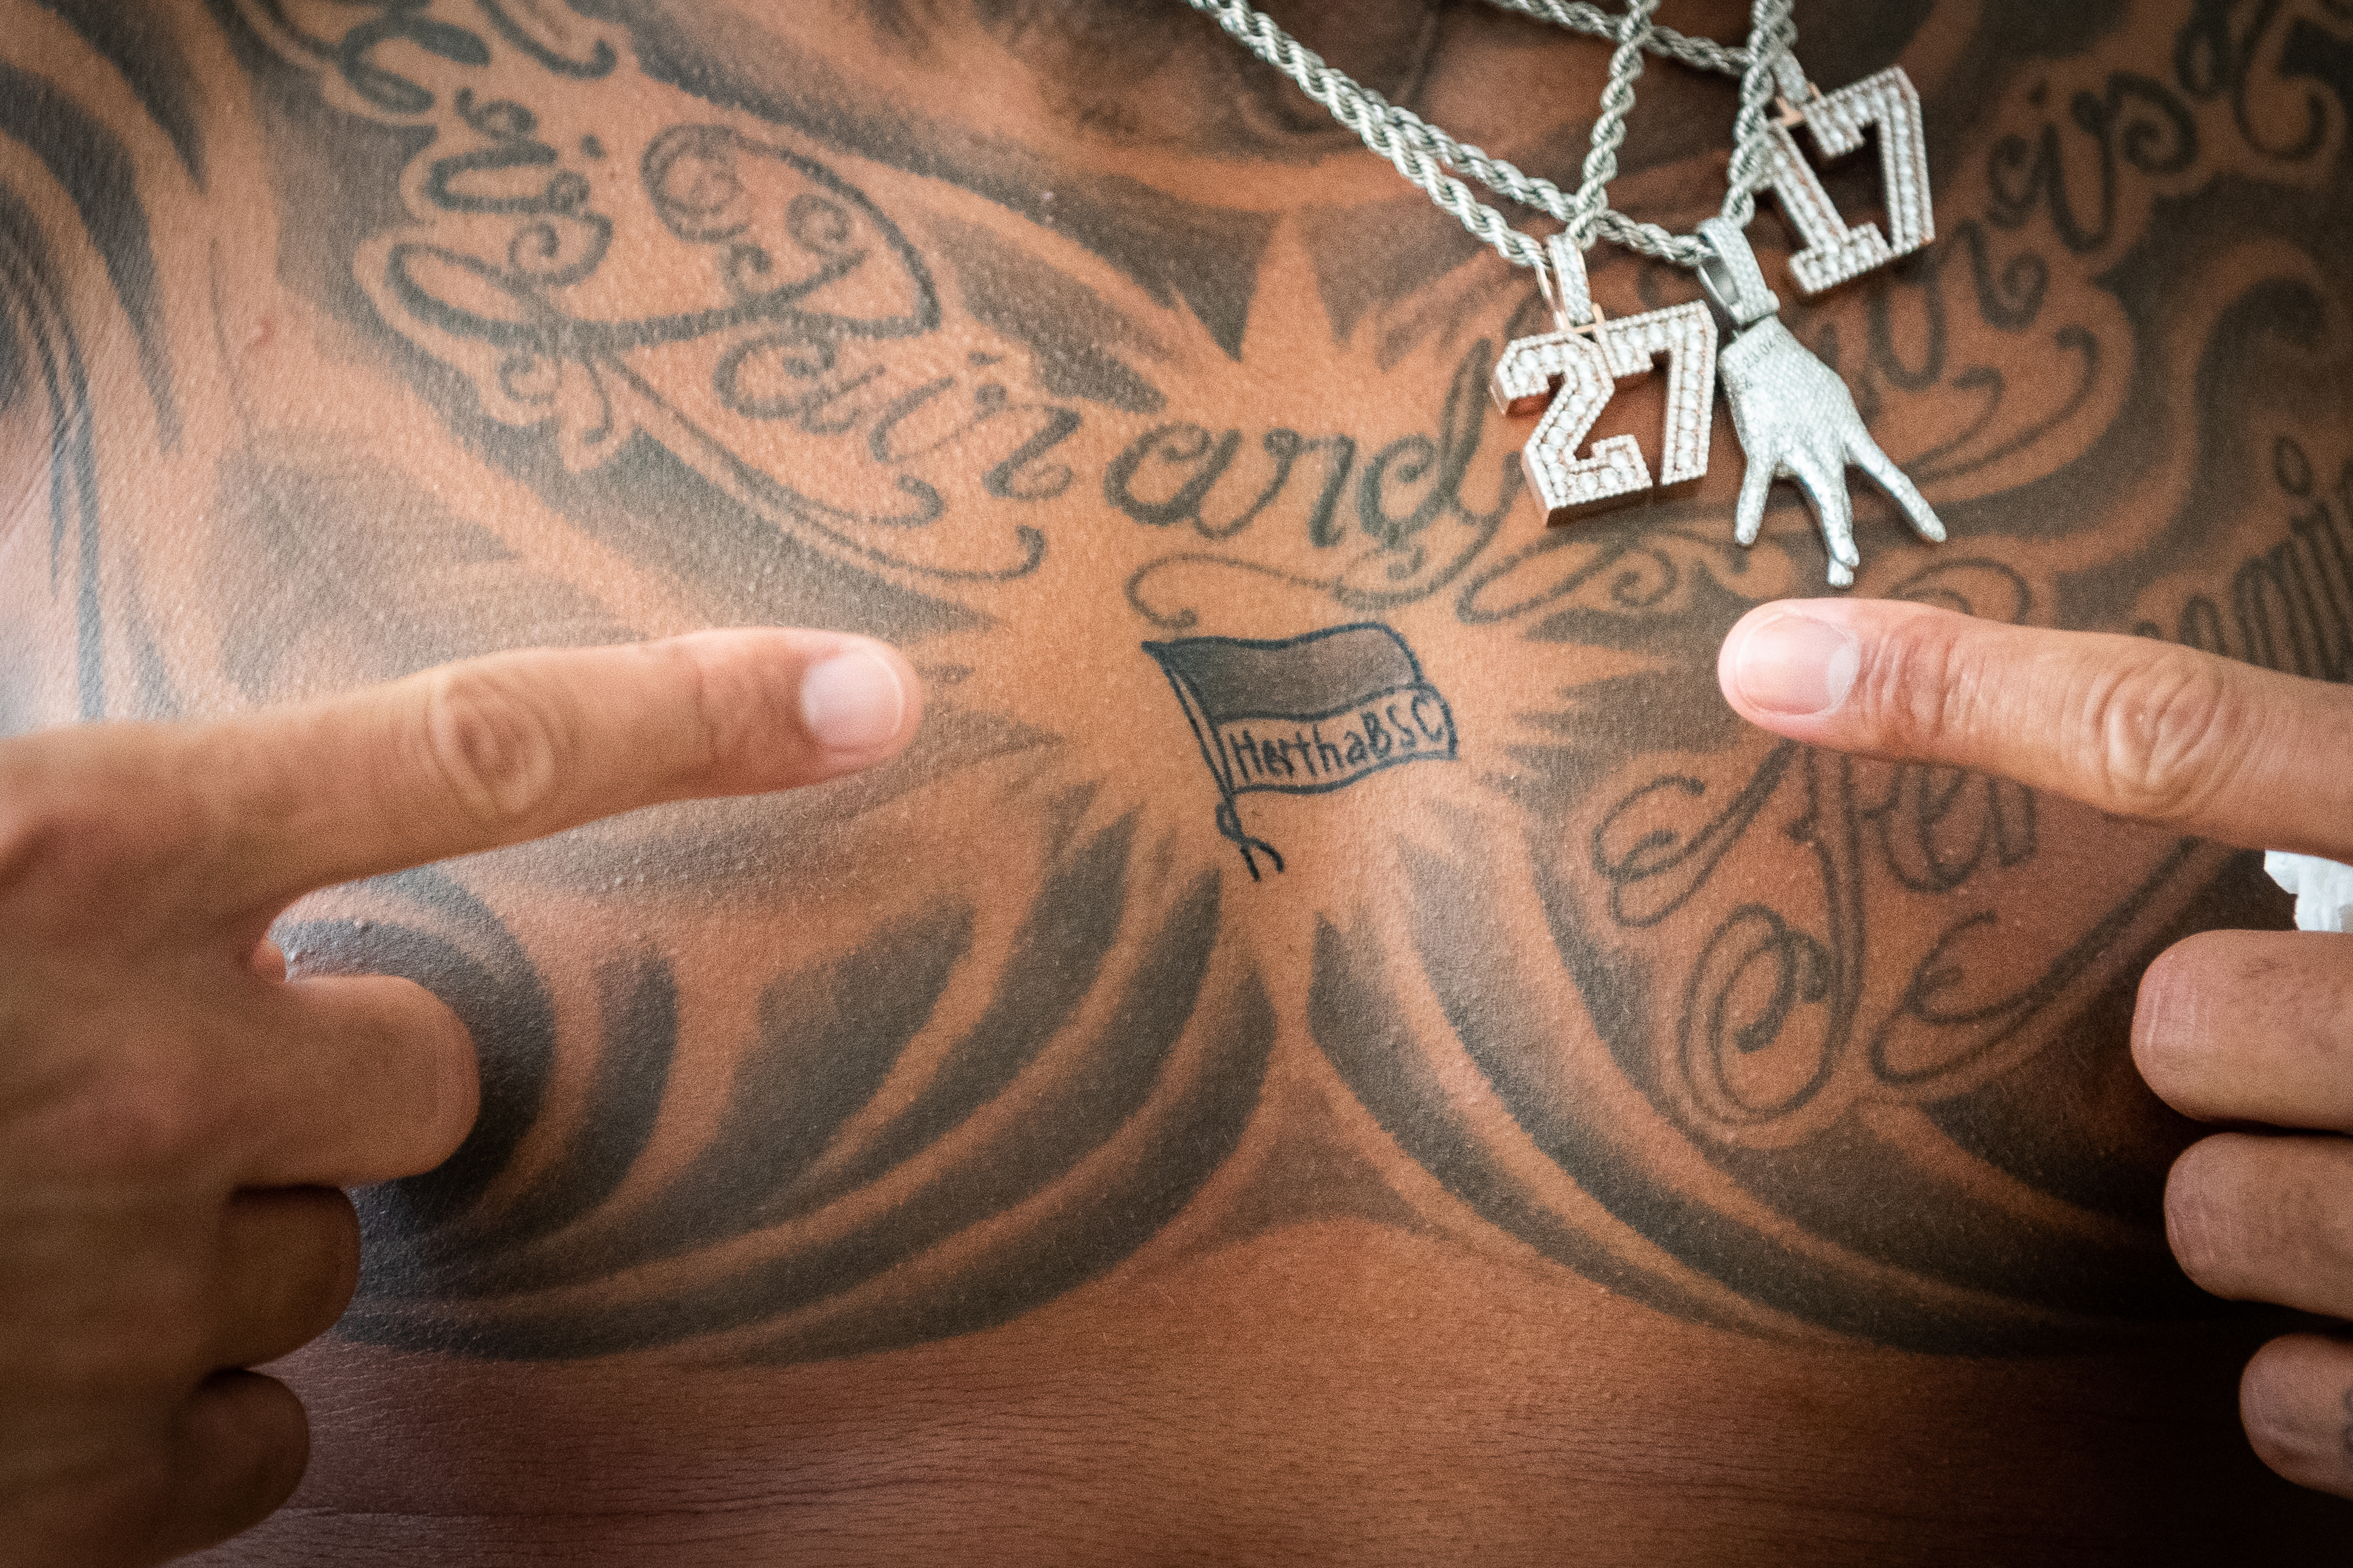 Prince Boateng shows off his new tattoo.